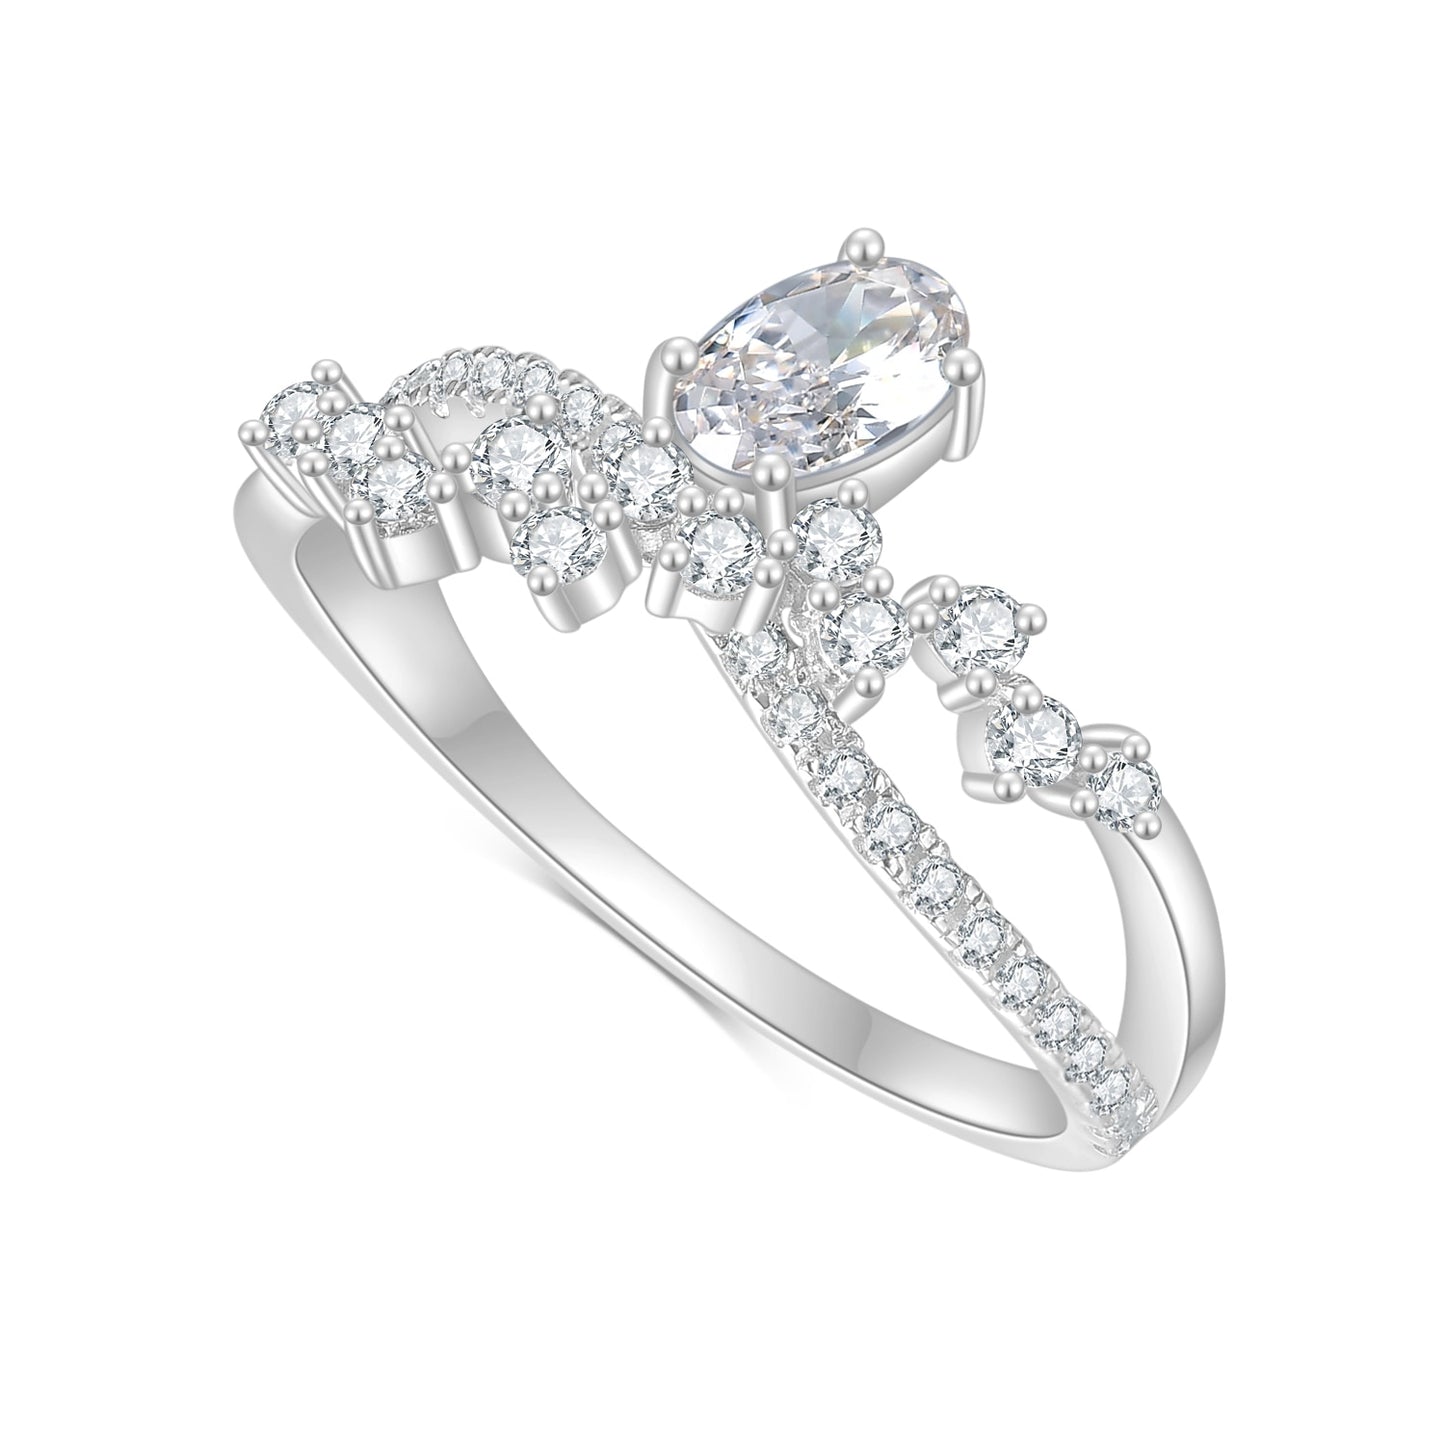 A silver asymmetrical twisted pave band ring with random sized moissanites and set with a oval moissanite.